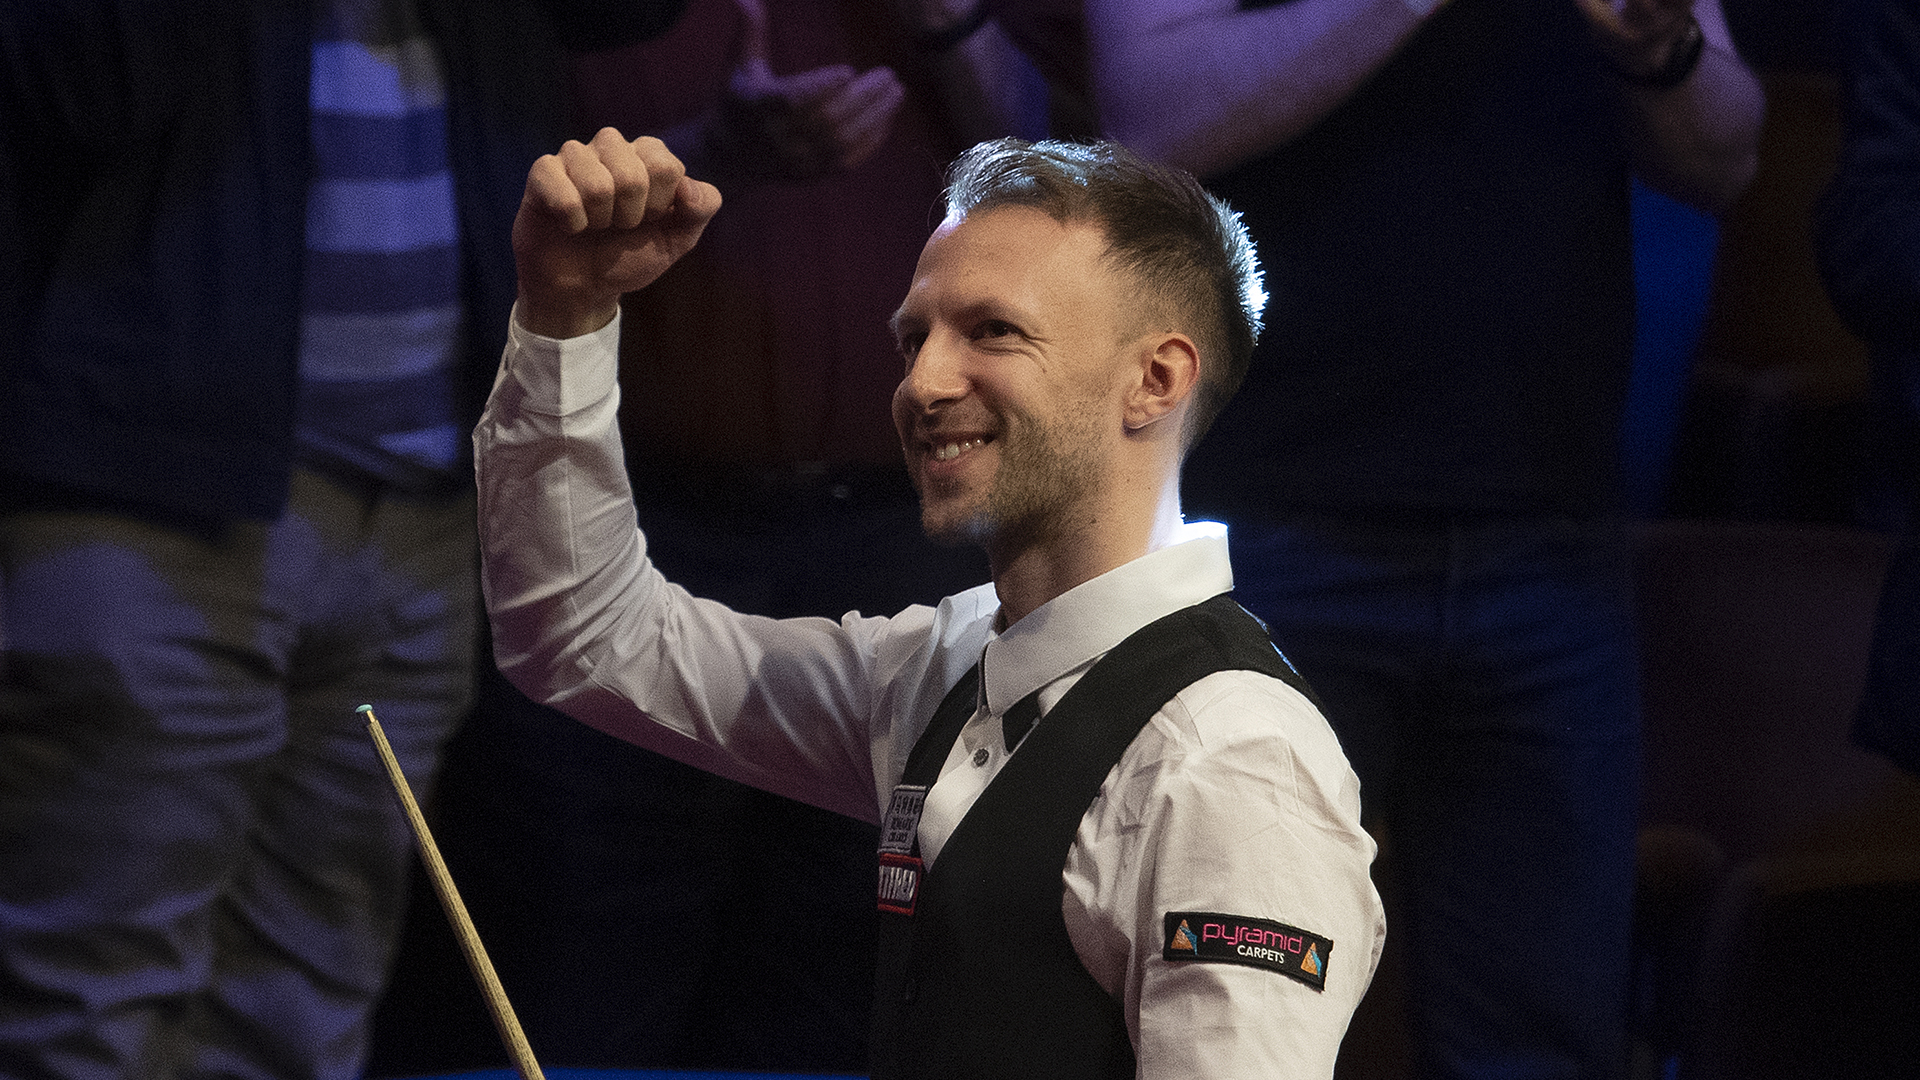 Players Championship Snooker 2020 Draw, schedule, betting odds, results and TV coverage